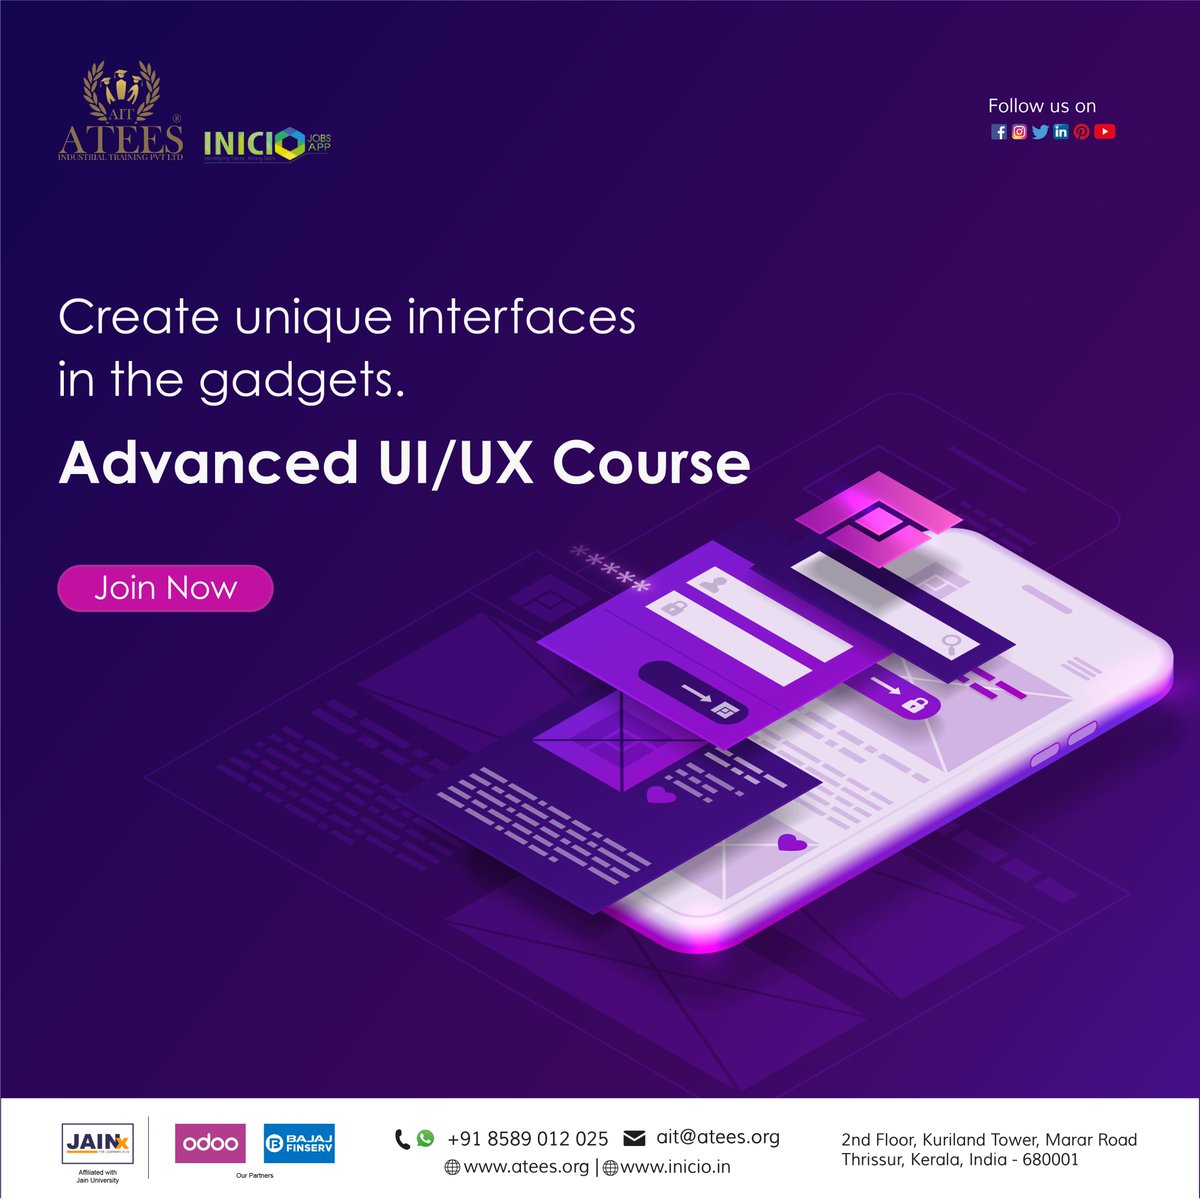 Future of design is here! Enroll in our advanced UI/UX course today to learn about the latest techniques, innovations and technologies in this craft.
#atees #course #study #uiux  #DiplomaCourses #courses2023 #uidesign #uxdesign #appcontrol  #futuredesigner #uiuxdesigner